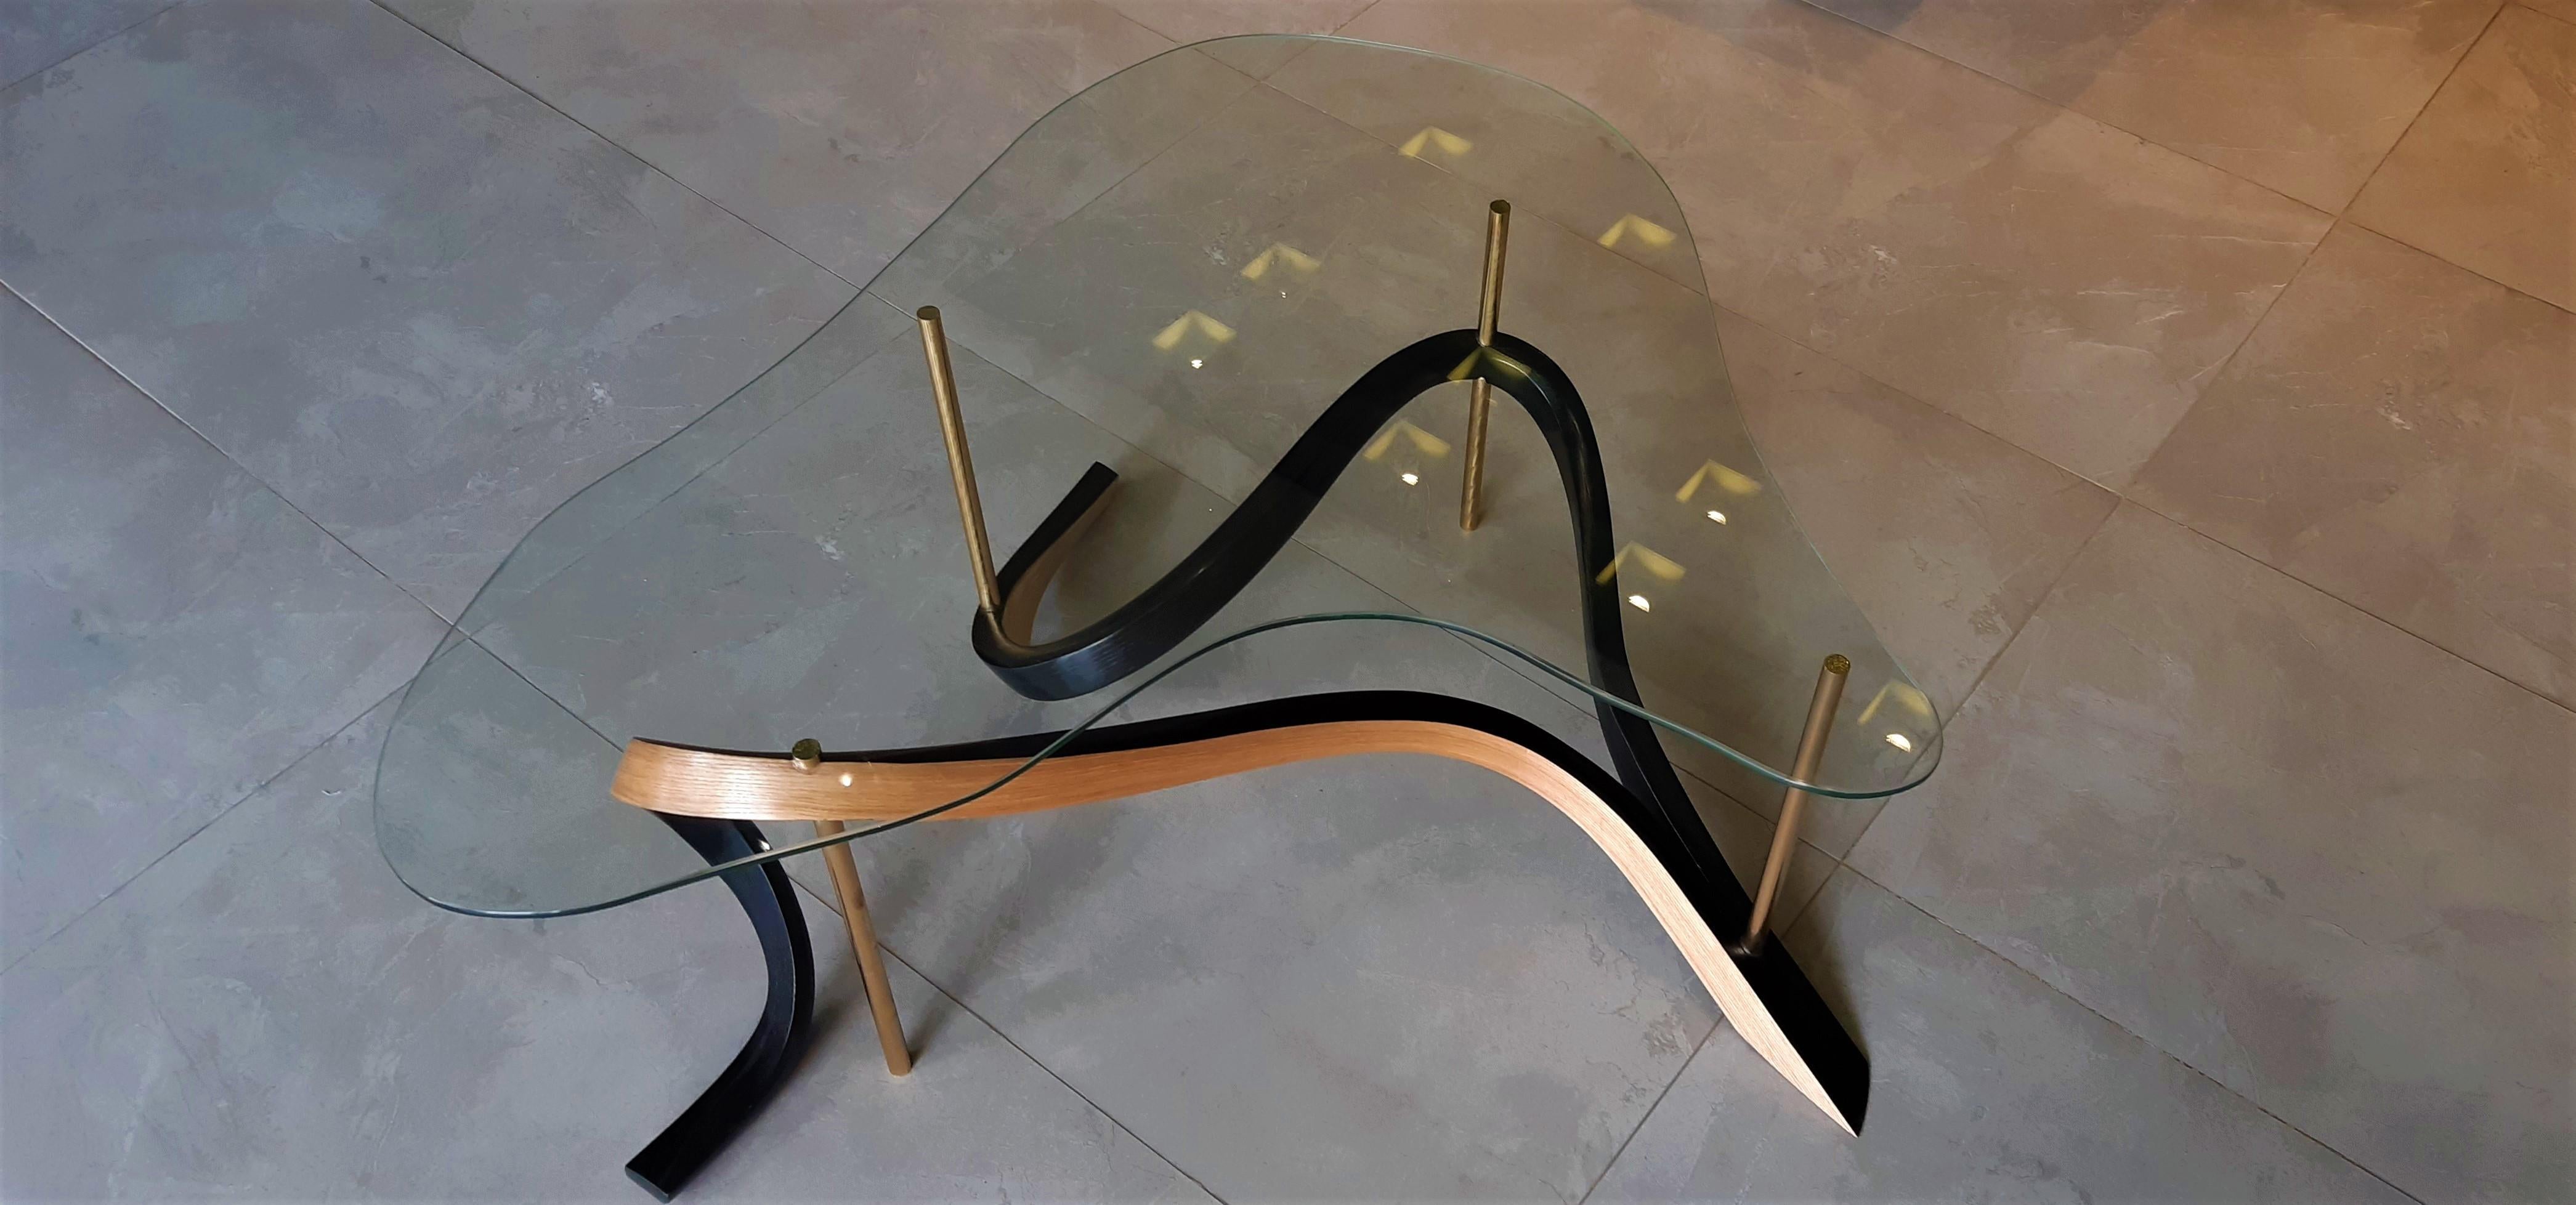 The Table B4 is a minimal bentwood design which has been used to hold the brass rods together which raise the top in place. The piece has been given an ebonised and natural finish to strike a contrast in the piece. The sides finished in a natural